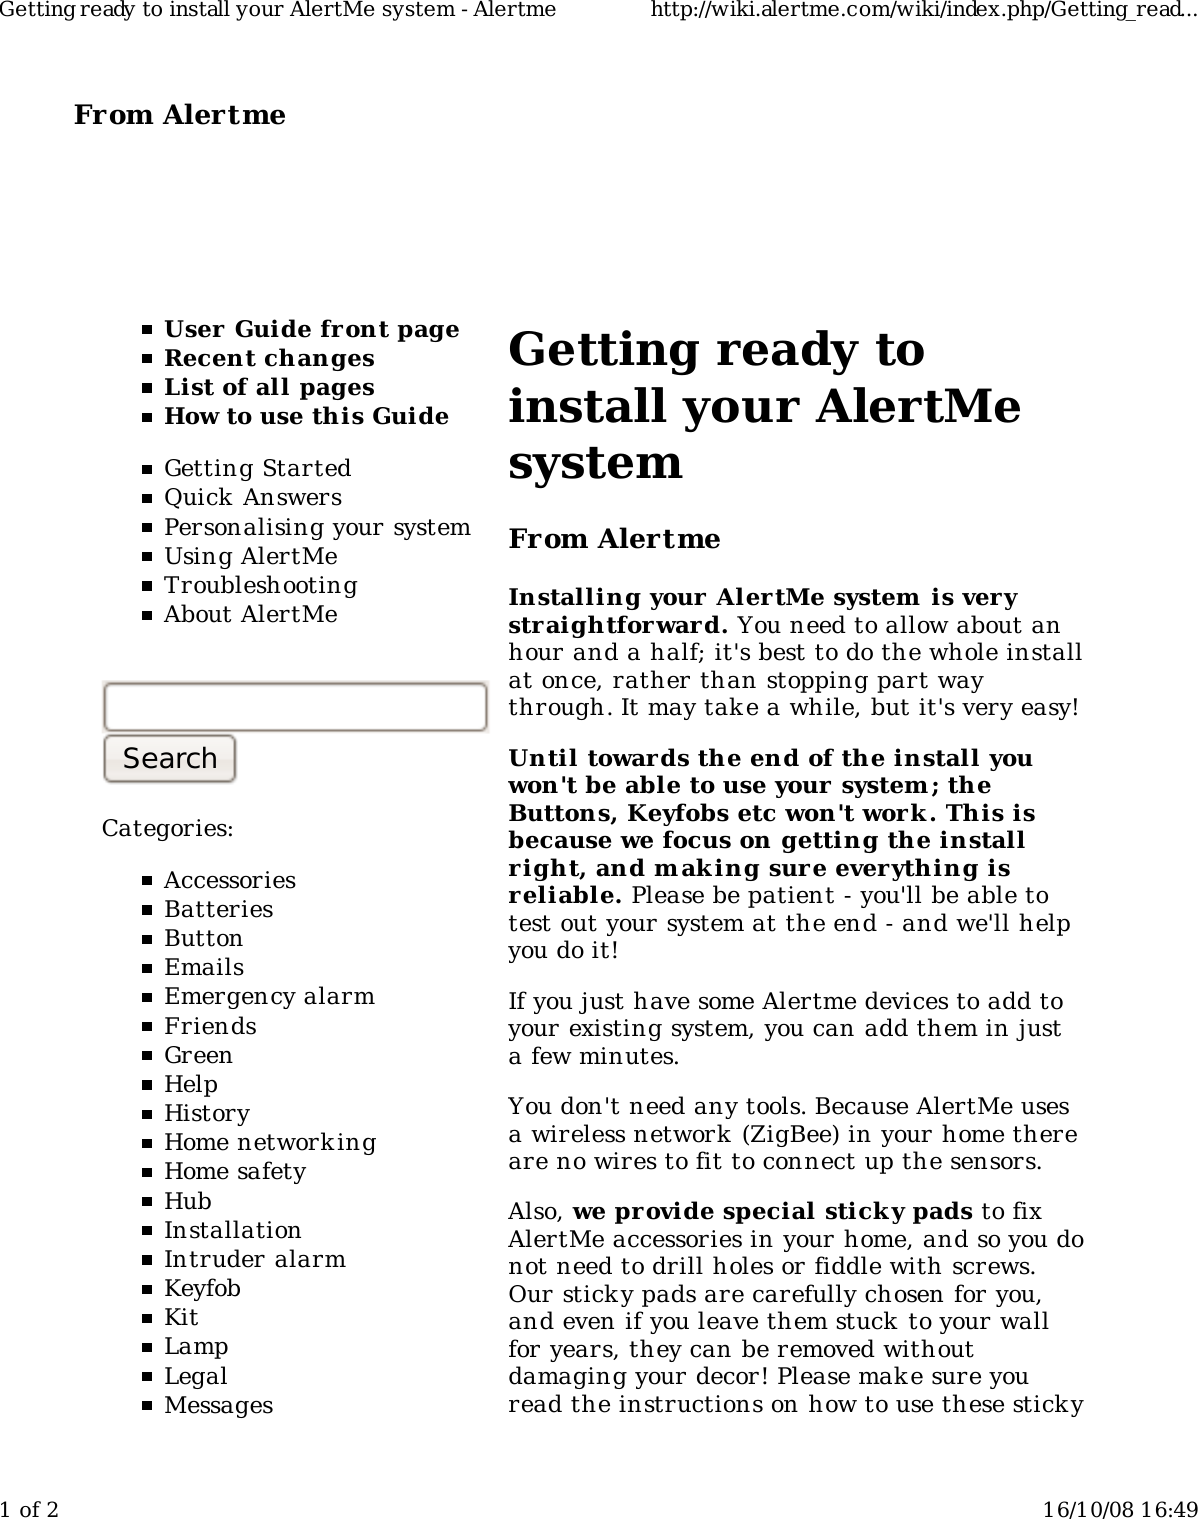 From Alertme  User Guide front pageRecent changesList of all pagesHow to use this GuideGetting StartedQuick AnswersPersonalising your systemUsing AlertMeTroubleshootingAbout AlertMeCategories:AccessoriesBatteriesButtonEmailsEmergency alarmFriendsGreenHelpHistoryHome network ingHome safetyHubInstallationIntruder alarmKeyfobKitLampLegalMessagesGetting ready toinstall your AlertMesystemFrom AlertmeInstalling your Aler tMe system is verystraightforward. You need to allow about anhour and a half; it&apos;s best to do the whole installat once, rather than stopping part waythrough. It may take a while, but it&apos;s very easy!Until towards the end of the install youwon&apos;t be able to use your system; theButtons, Keyfobs etc won&apos;t work . This isbecause we focus on getting the installright, and m aking sure everything isreliable. Please be patient - you&apos;ll be able totest out your system at the end - and we&apos;ll helpyou do it!If you just have some Alertme devices to add toyour existing system, you can add them in justa few minutes.You don&apos;t need any tools. Because AlertMe usesa wireless network  (ZigBee) in your home thereare no wires to fit to connect up the sensors.Also, we provide special stick y pads to fixAlertMe accessories in your home, and so you donot need to drill holes or fiddle with screws.Our sticky pads are carefully chosen for you,and even if you leave them stuck to your wallfor years, they can be removed withoutdamaging your decor! Please make sure youread the instructions on how to use these stickyGetting ready to install your AlertMe system - Alertme http://wiki.alertme.com/wiki/index.php/Getting_read...1 of 2 16/10/08 16:49